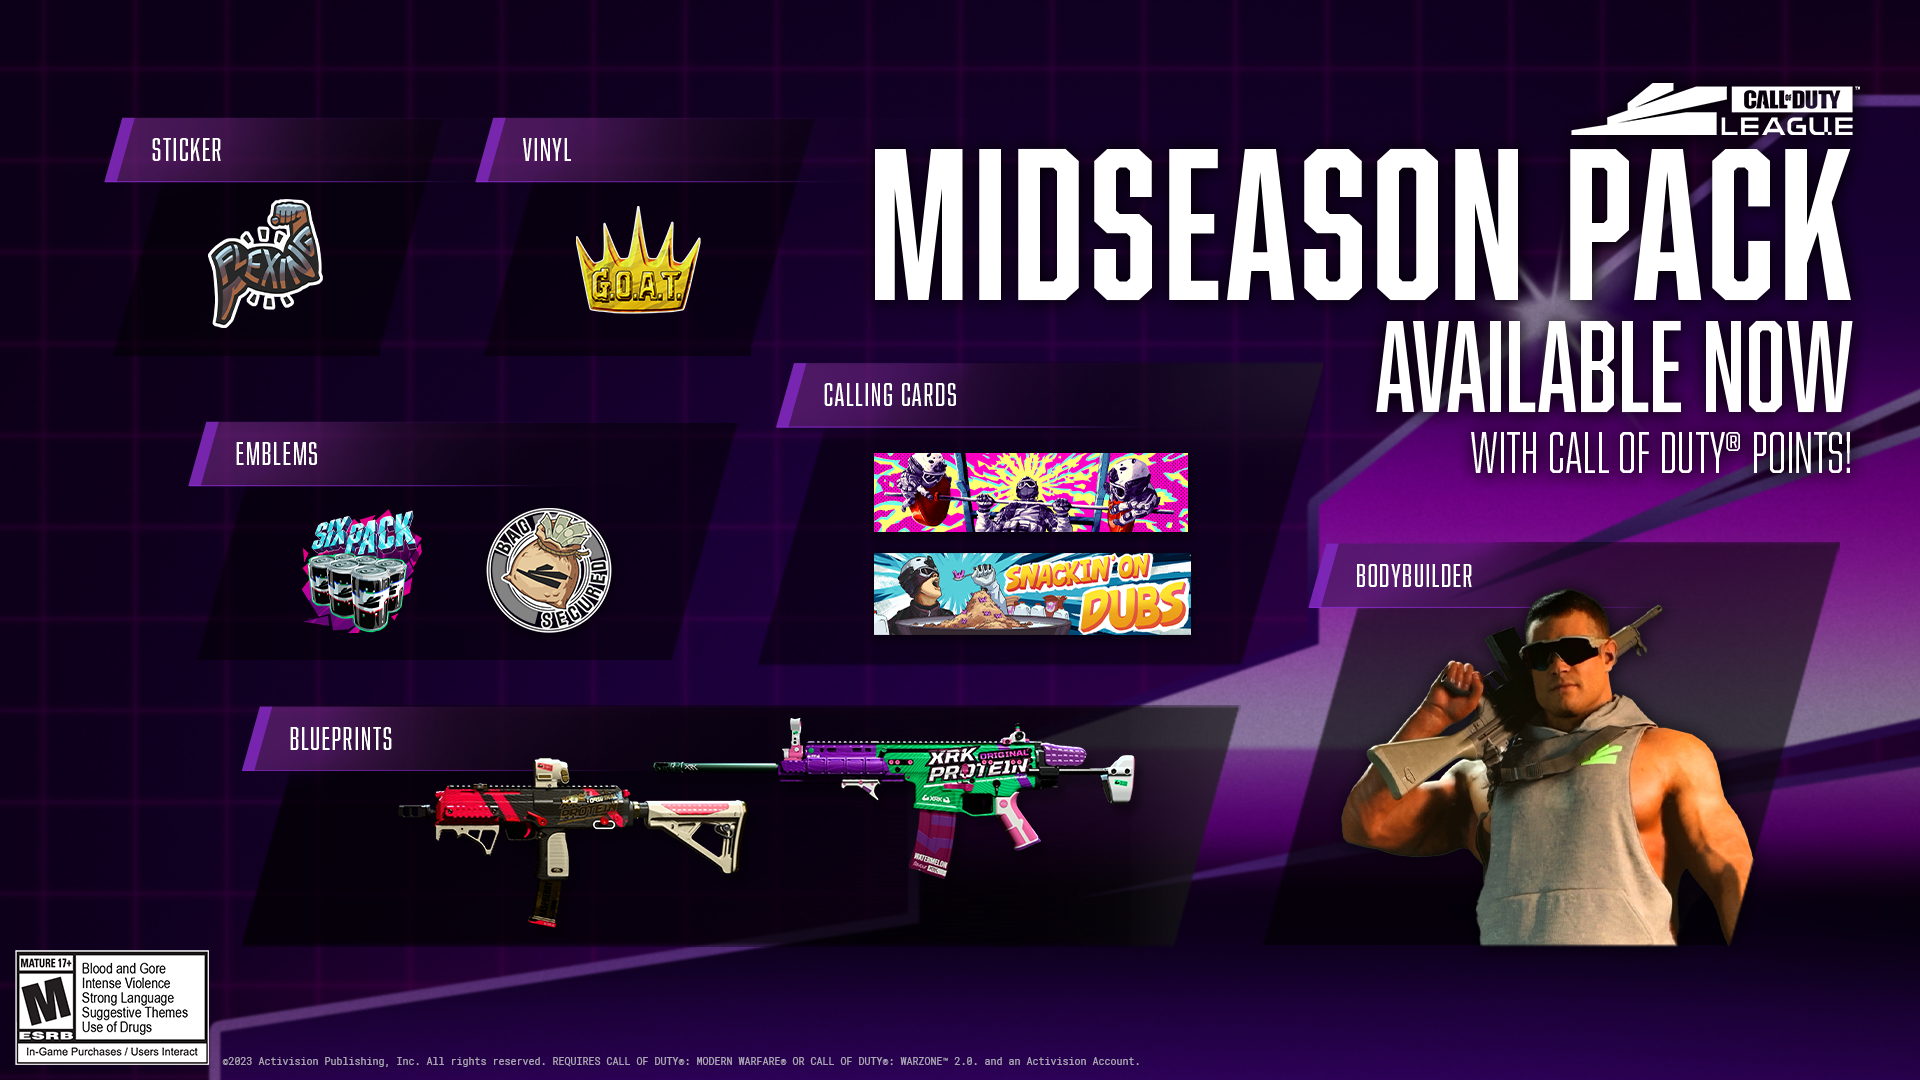 CDL_2023_MidseasonPack_AVAILABLE-NOW_BA03_Social_1920x1080_NA.png